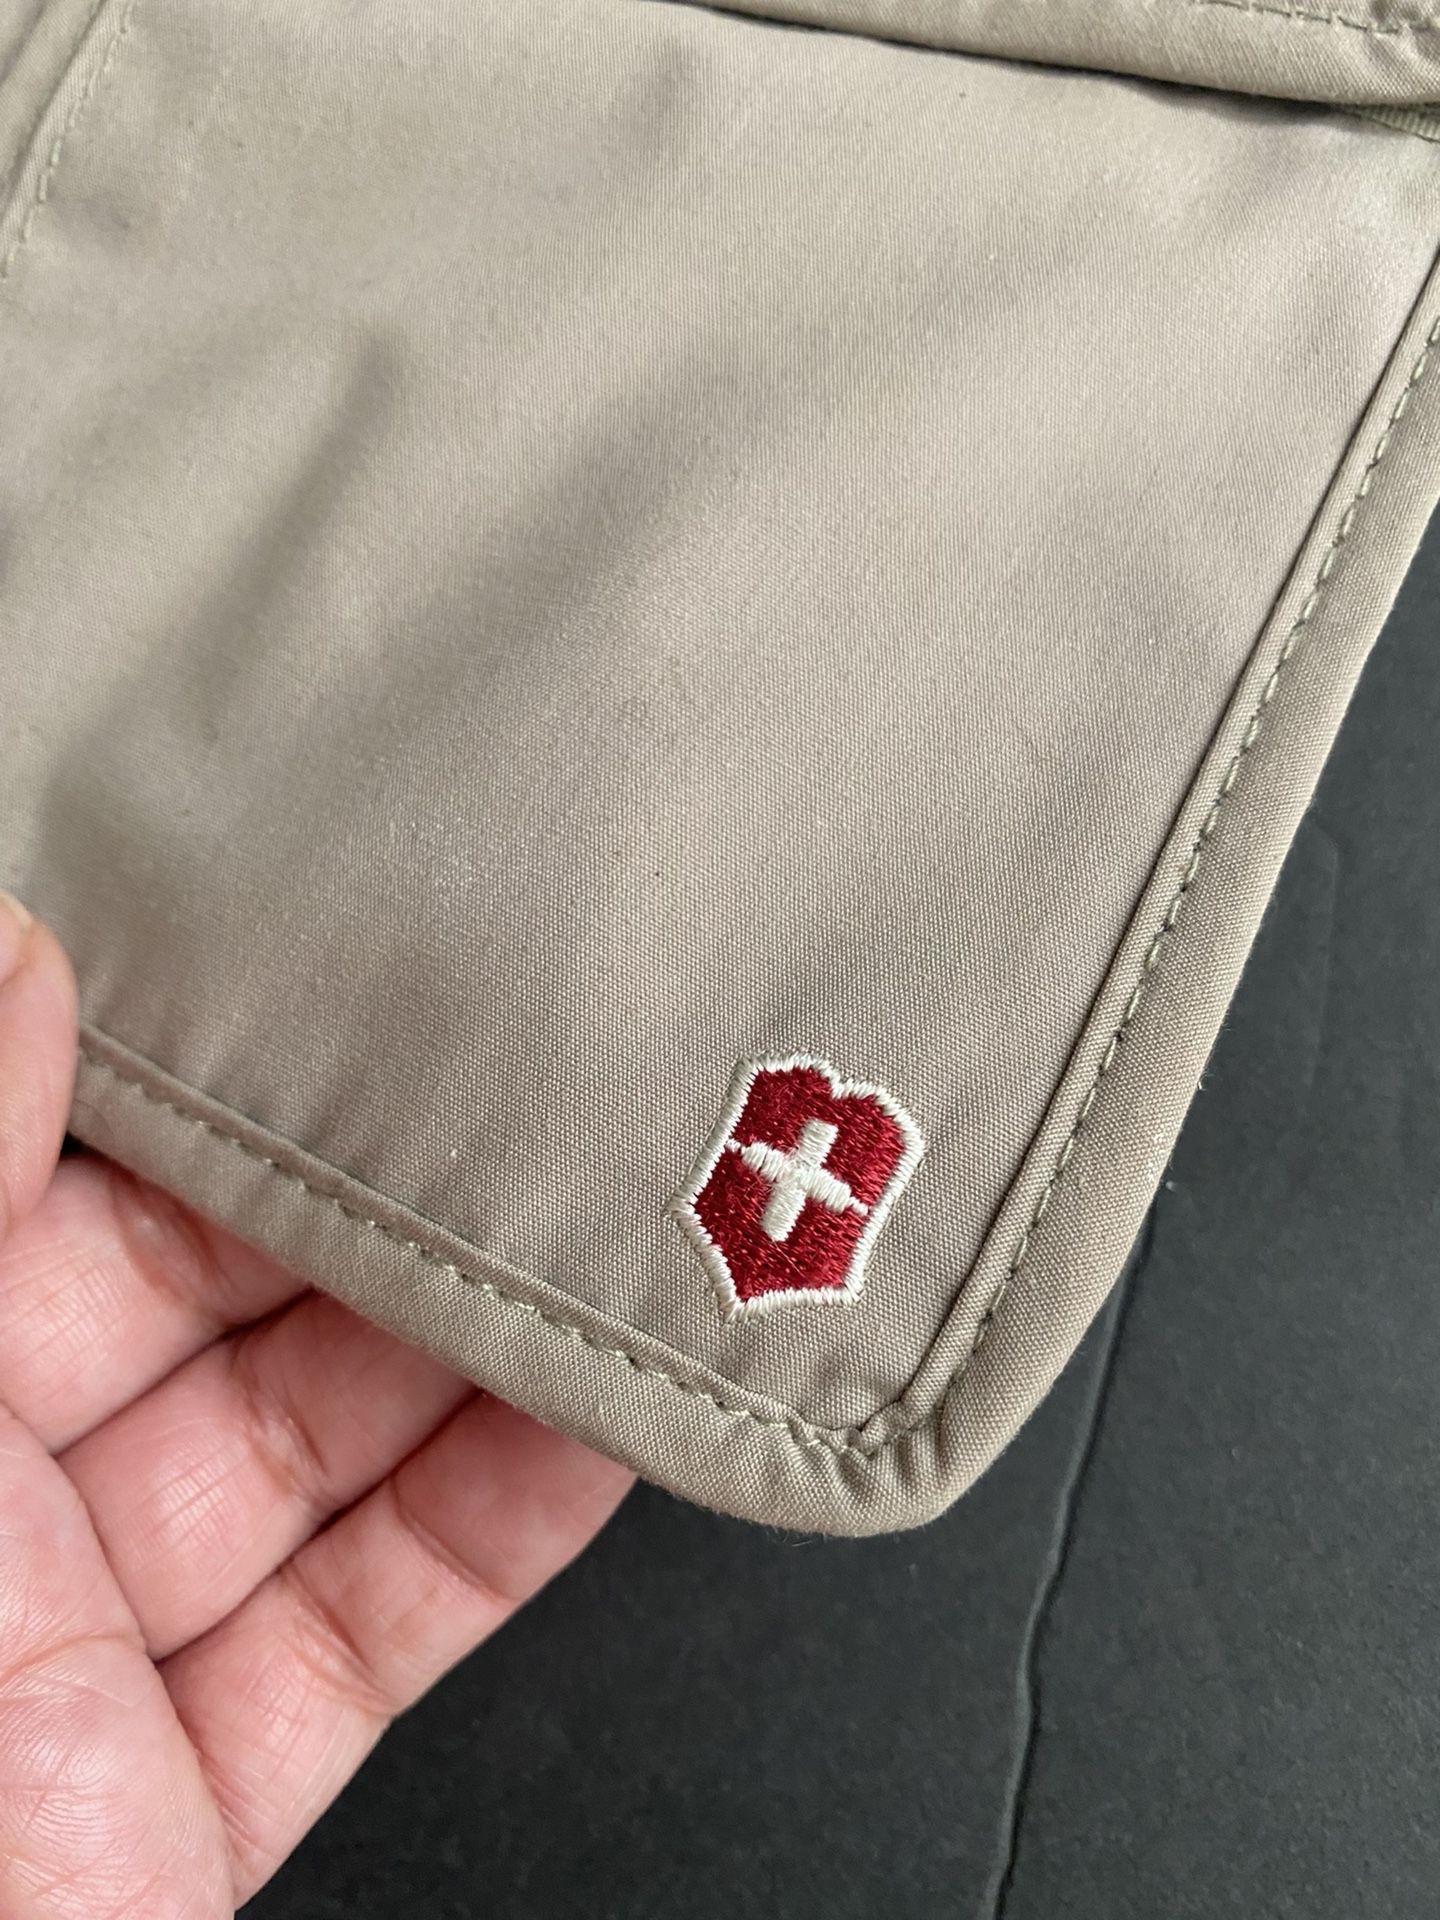 Victorinox Swiss Army Deluxe Camel Concealed Hidden Neck Pouch Many Pockets